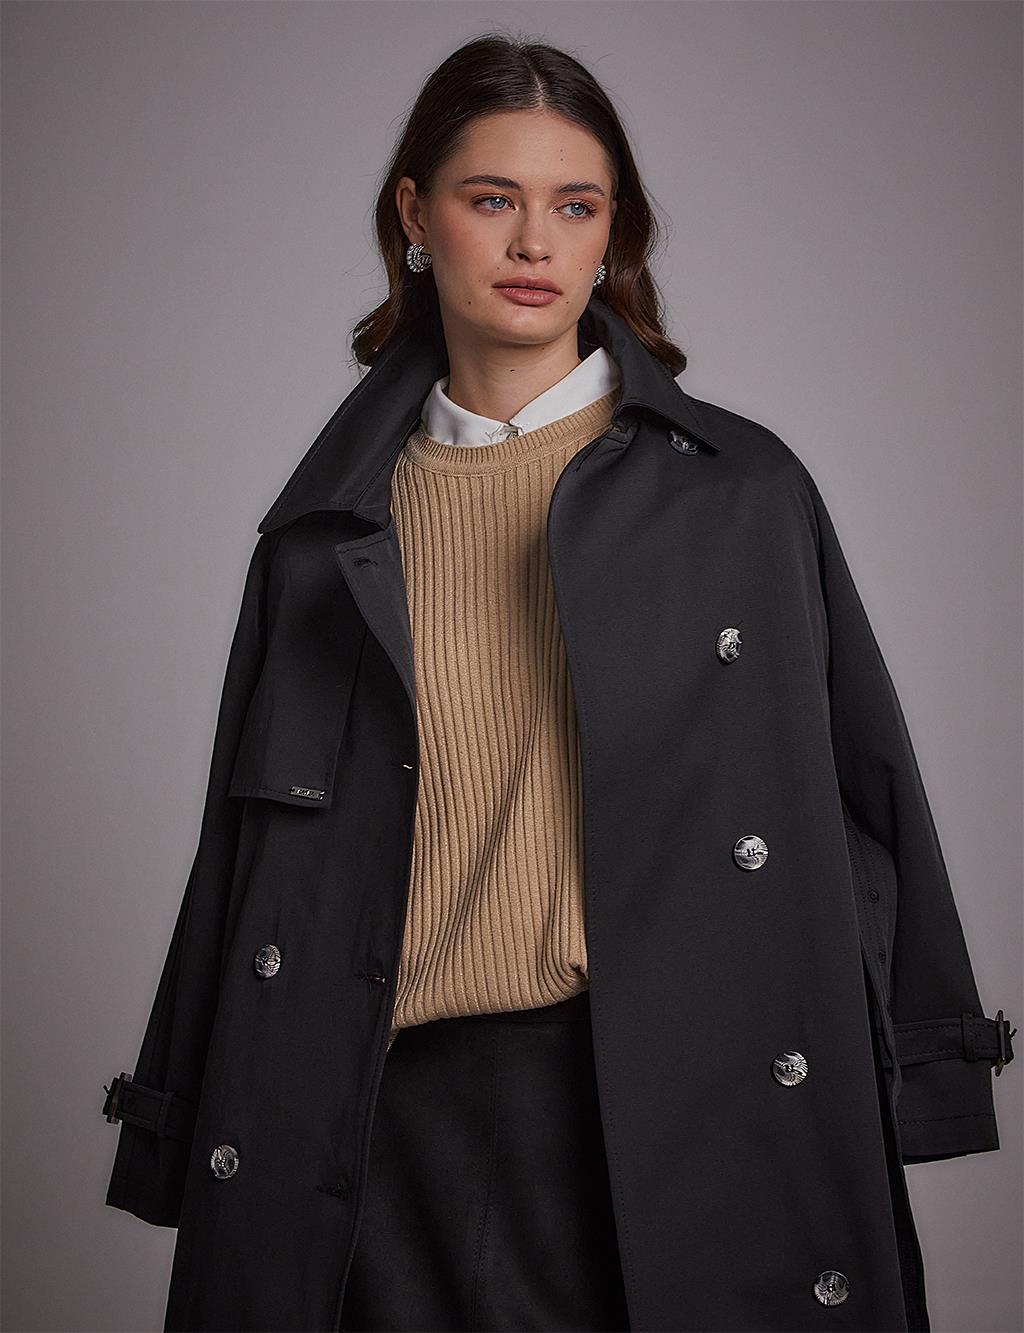 Belted Double Breasted Trench Coat Black